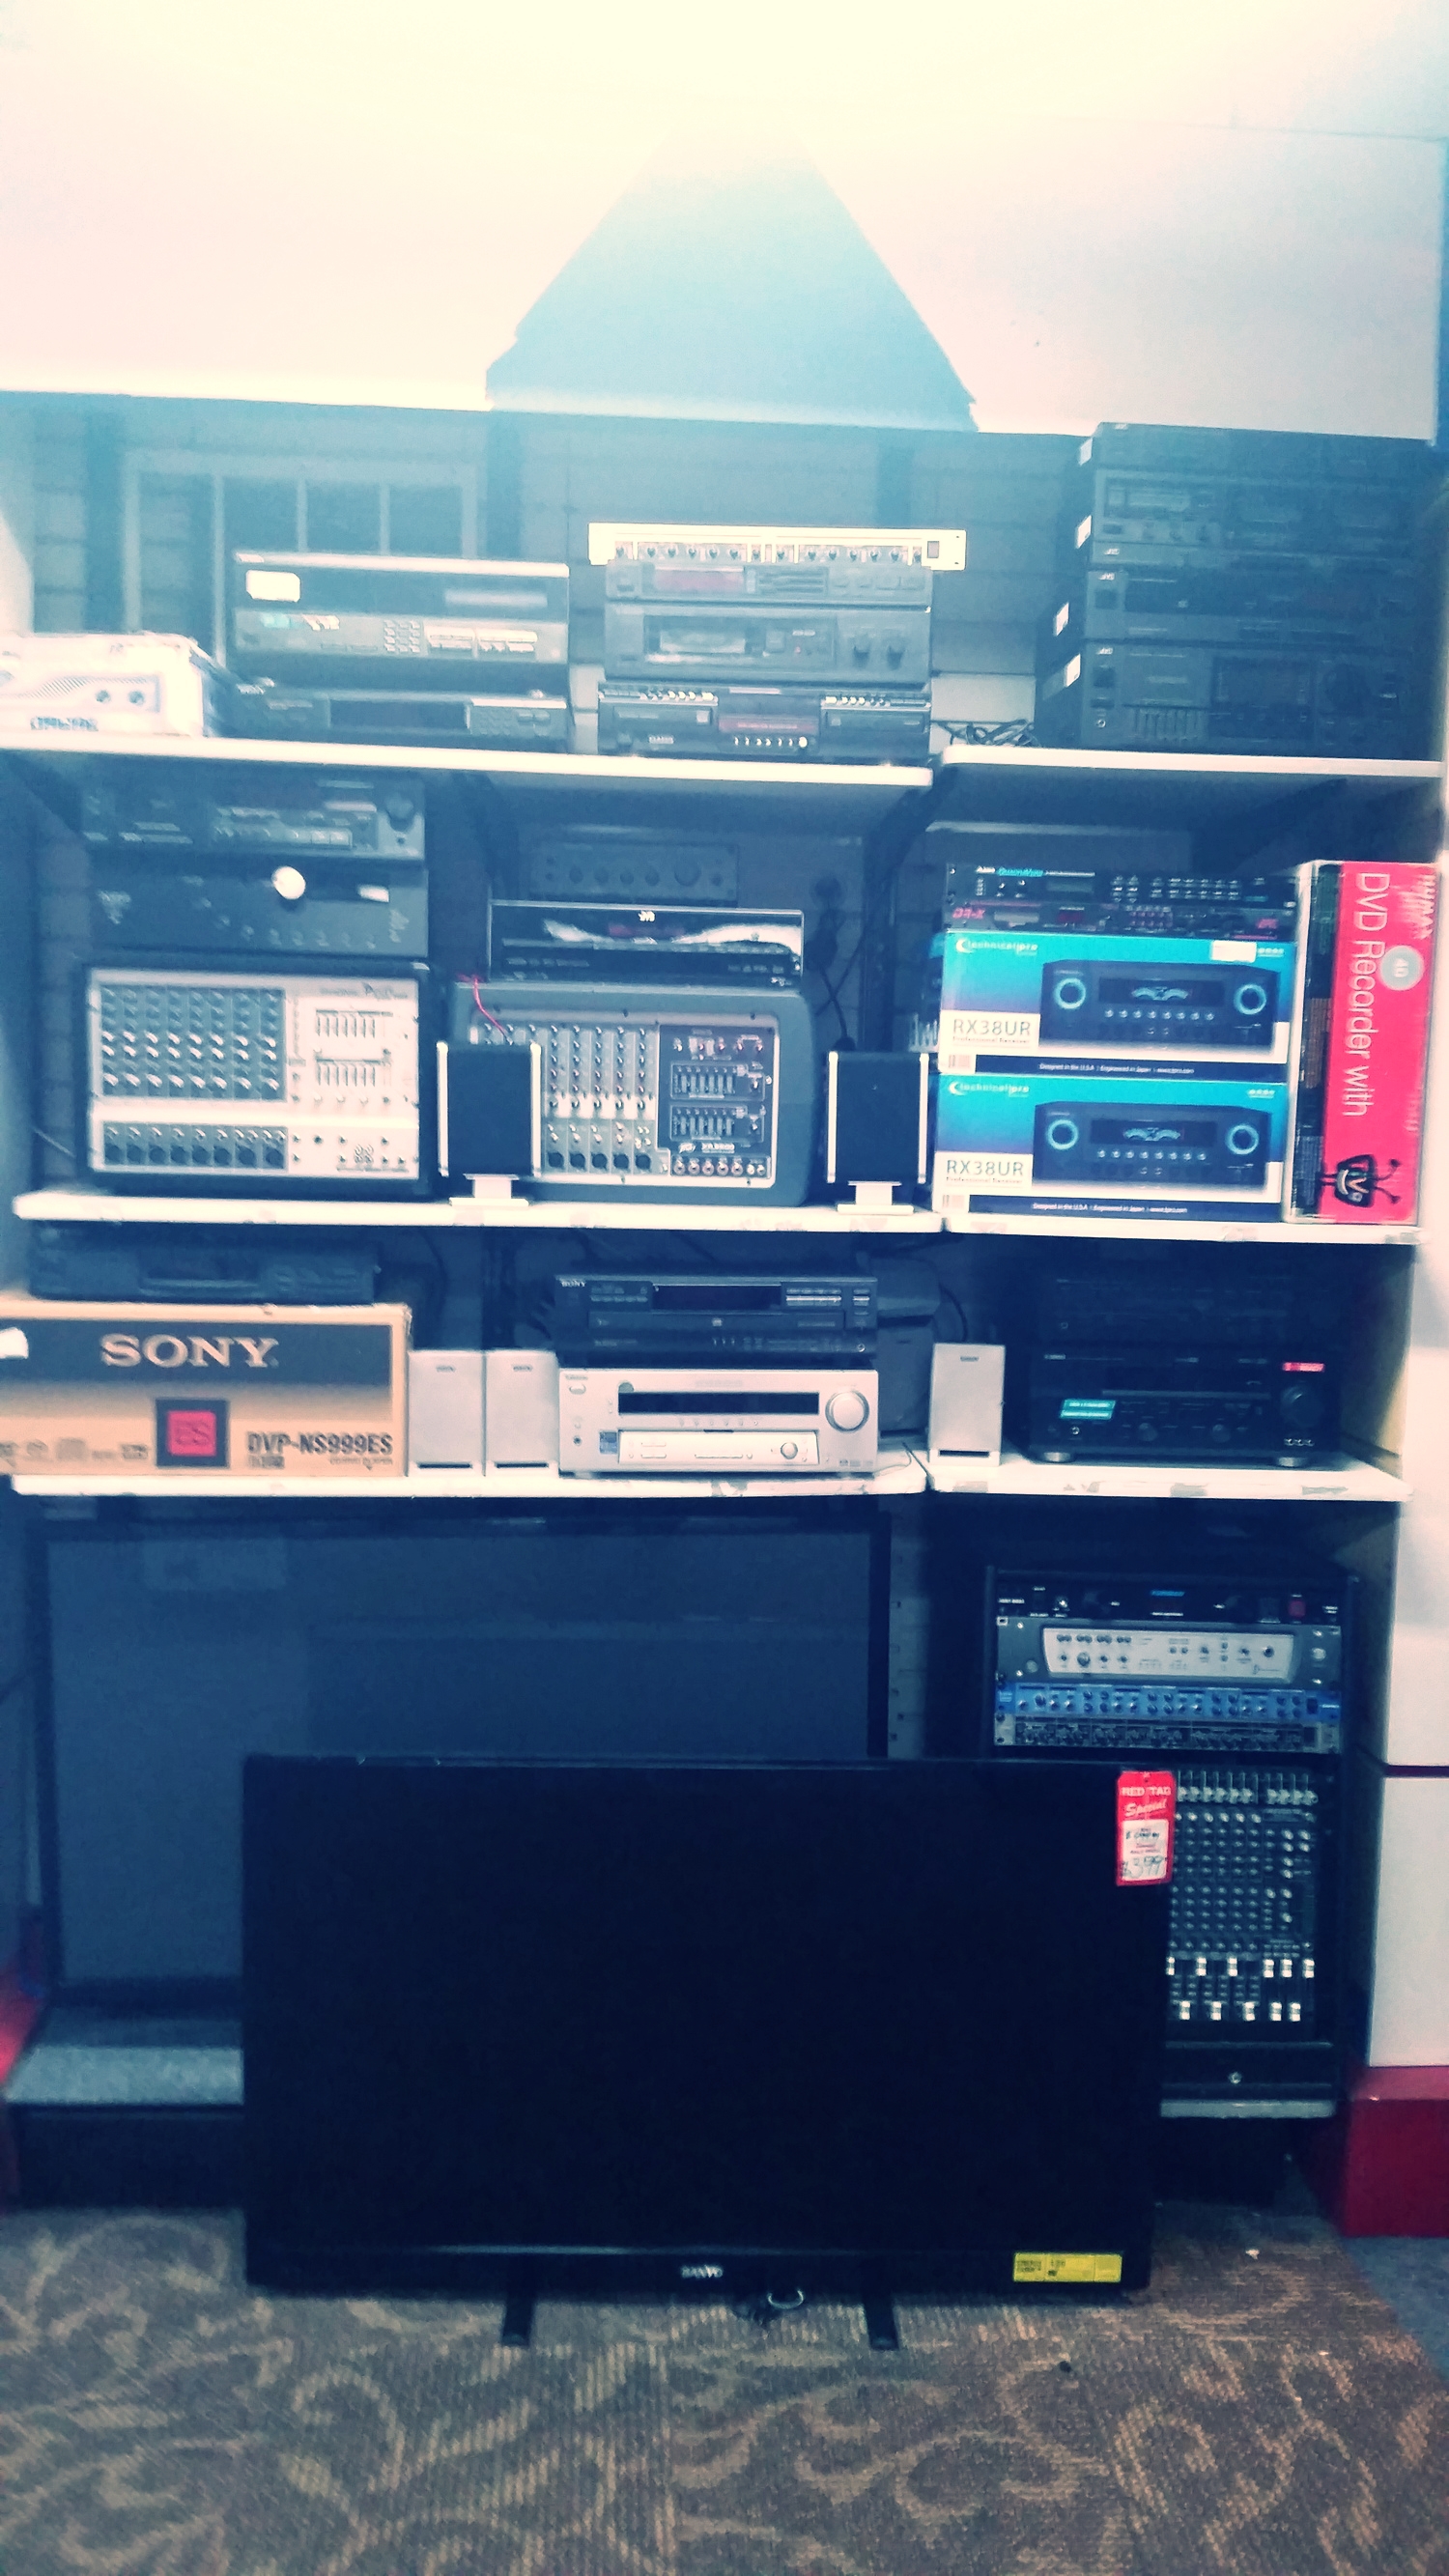 We are a one stop shop for audio equipment. Everything ranging from receivers and speakers, to a full studio set-up